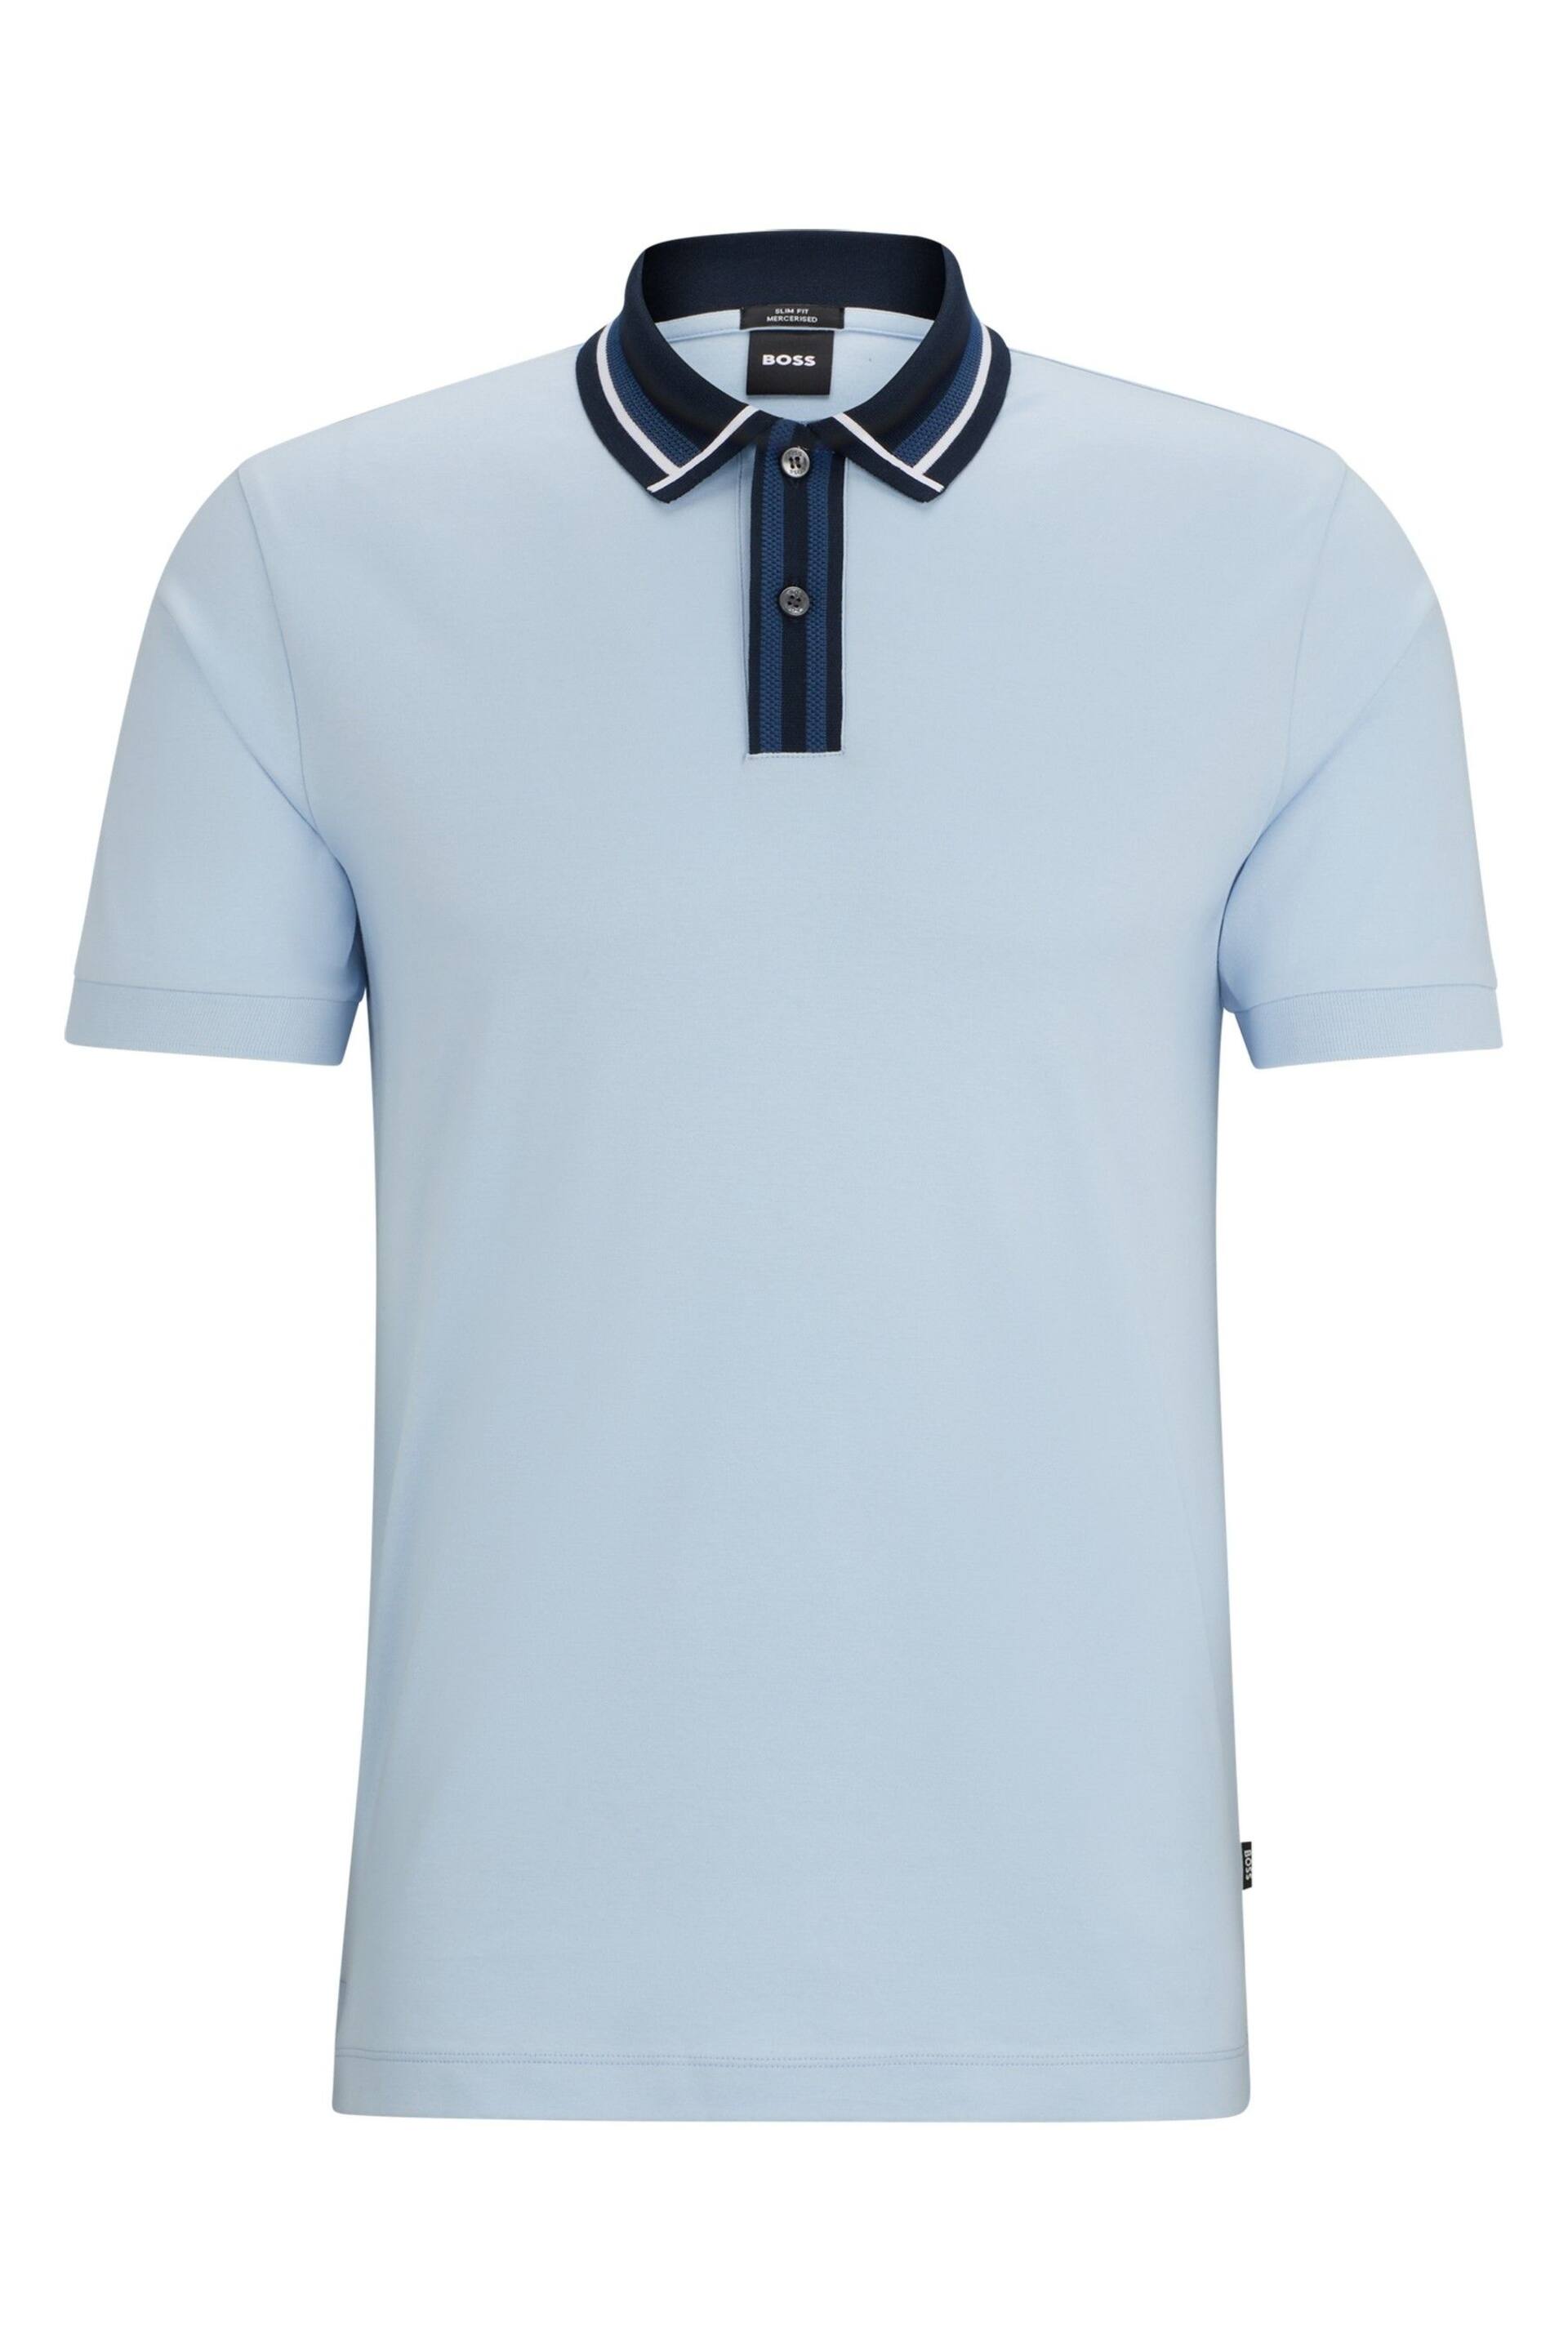 BOSS Blue Contrast Collar Slim Fit Polo Shirt - Image 5 of 5